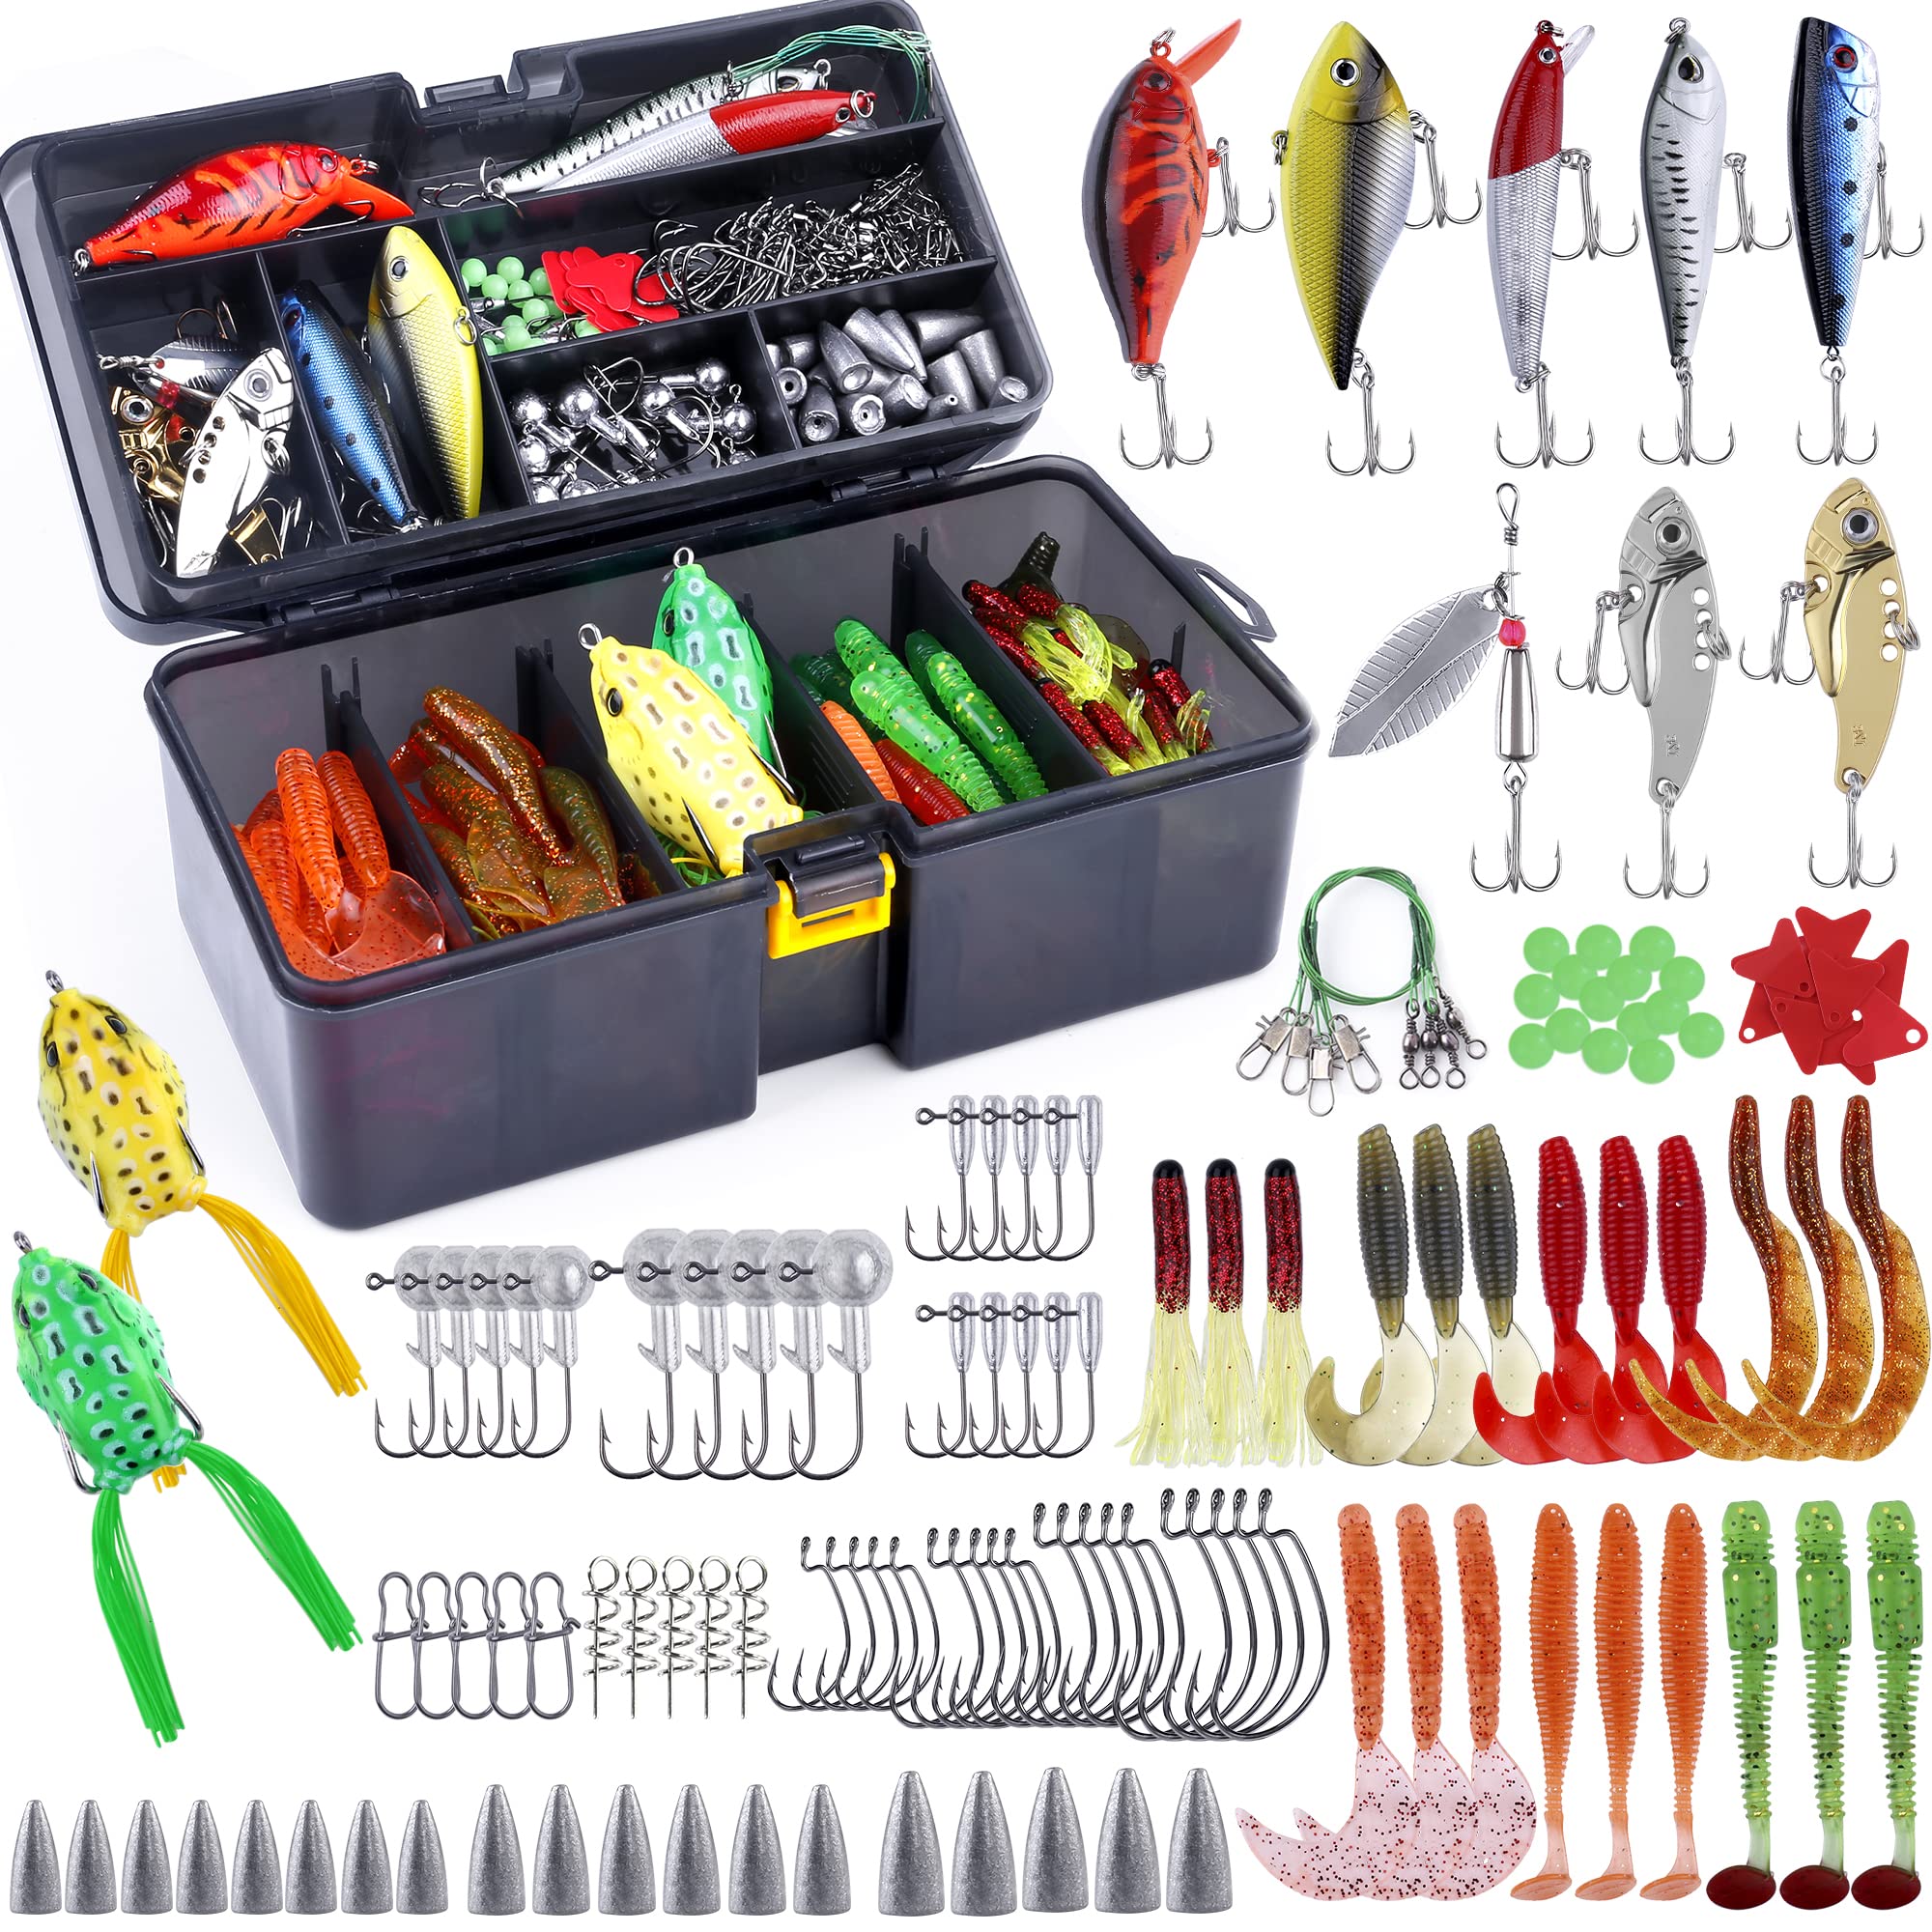 TUXIBIN 101Pcs Set Fishing Lure Kits Mixed Universal Multifunction Assorted Fishing Lure Set With Fishing Tackle Box - Including Spinners, Worm